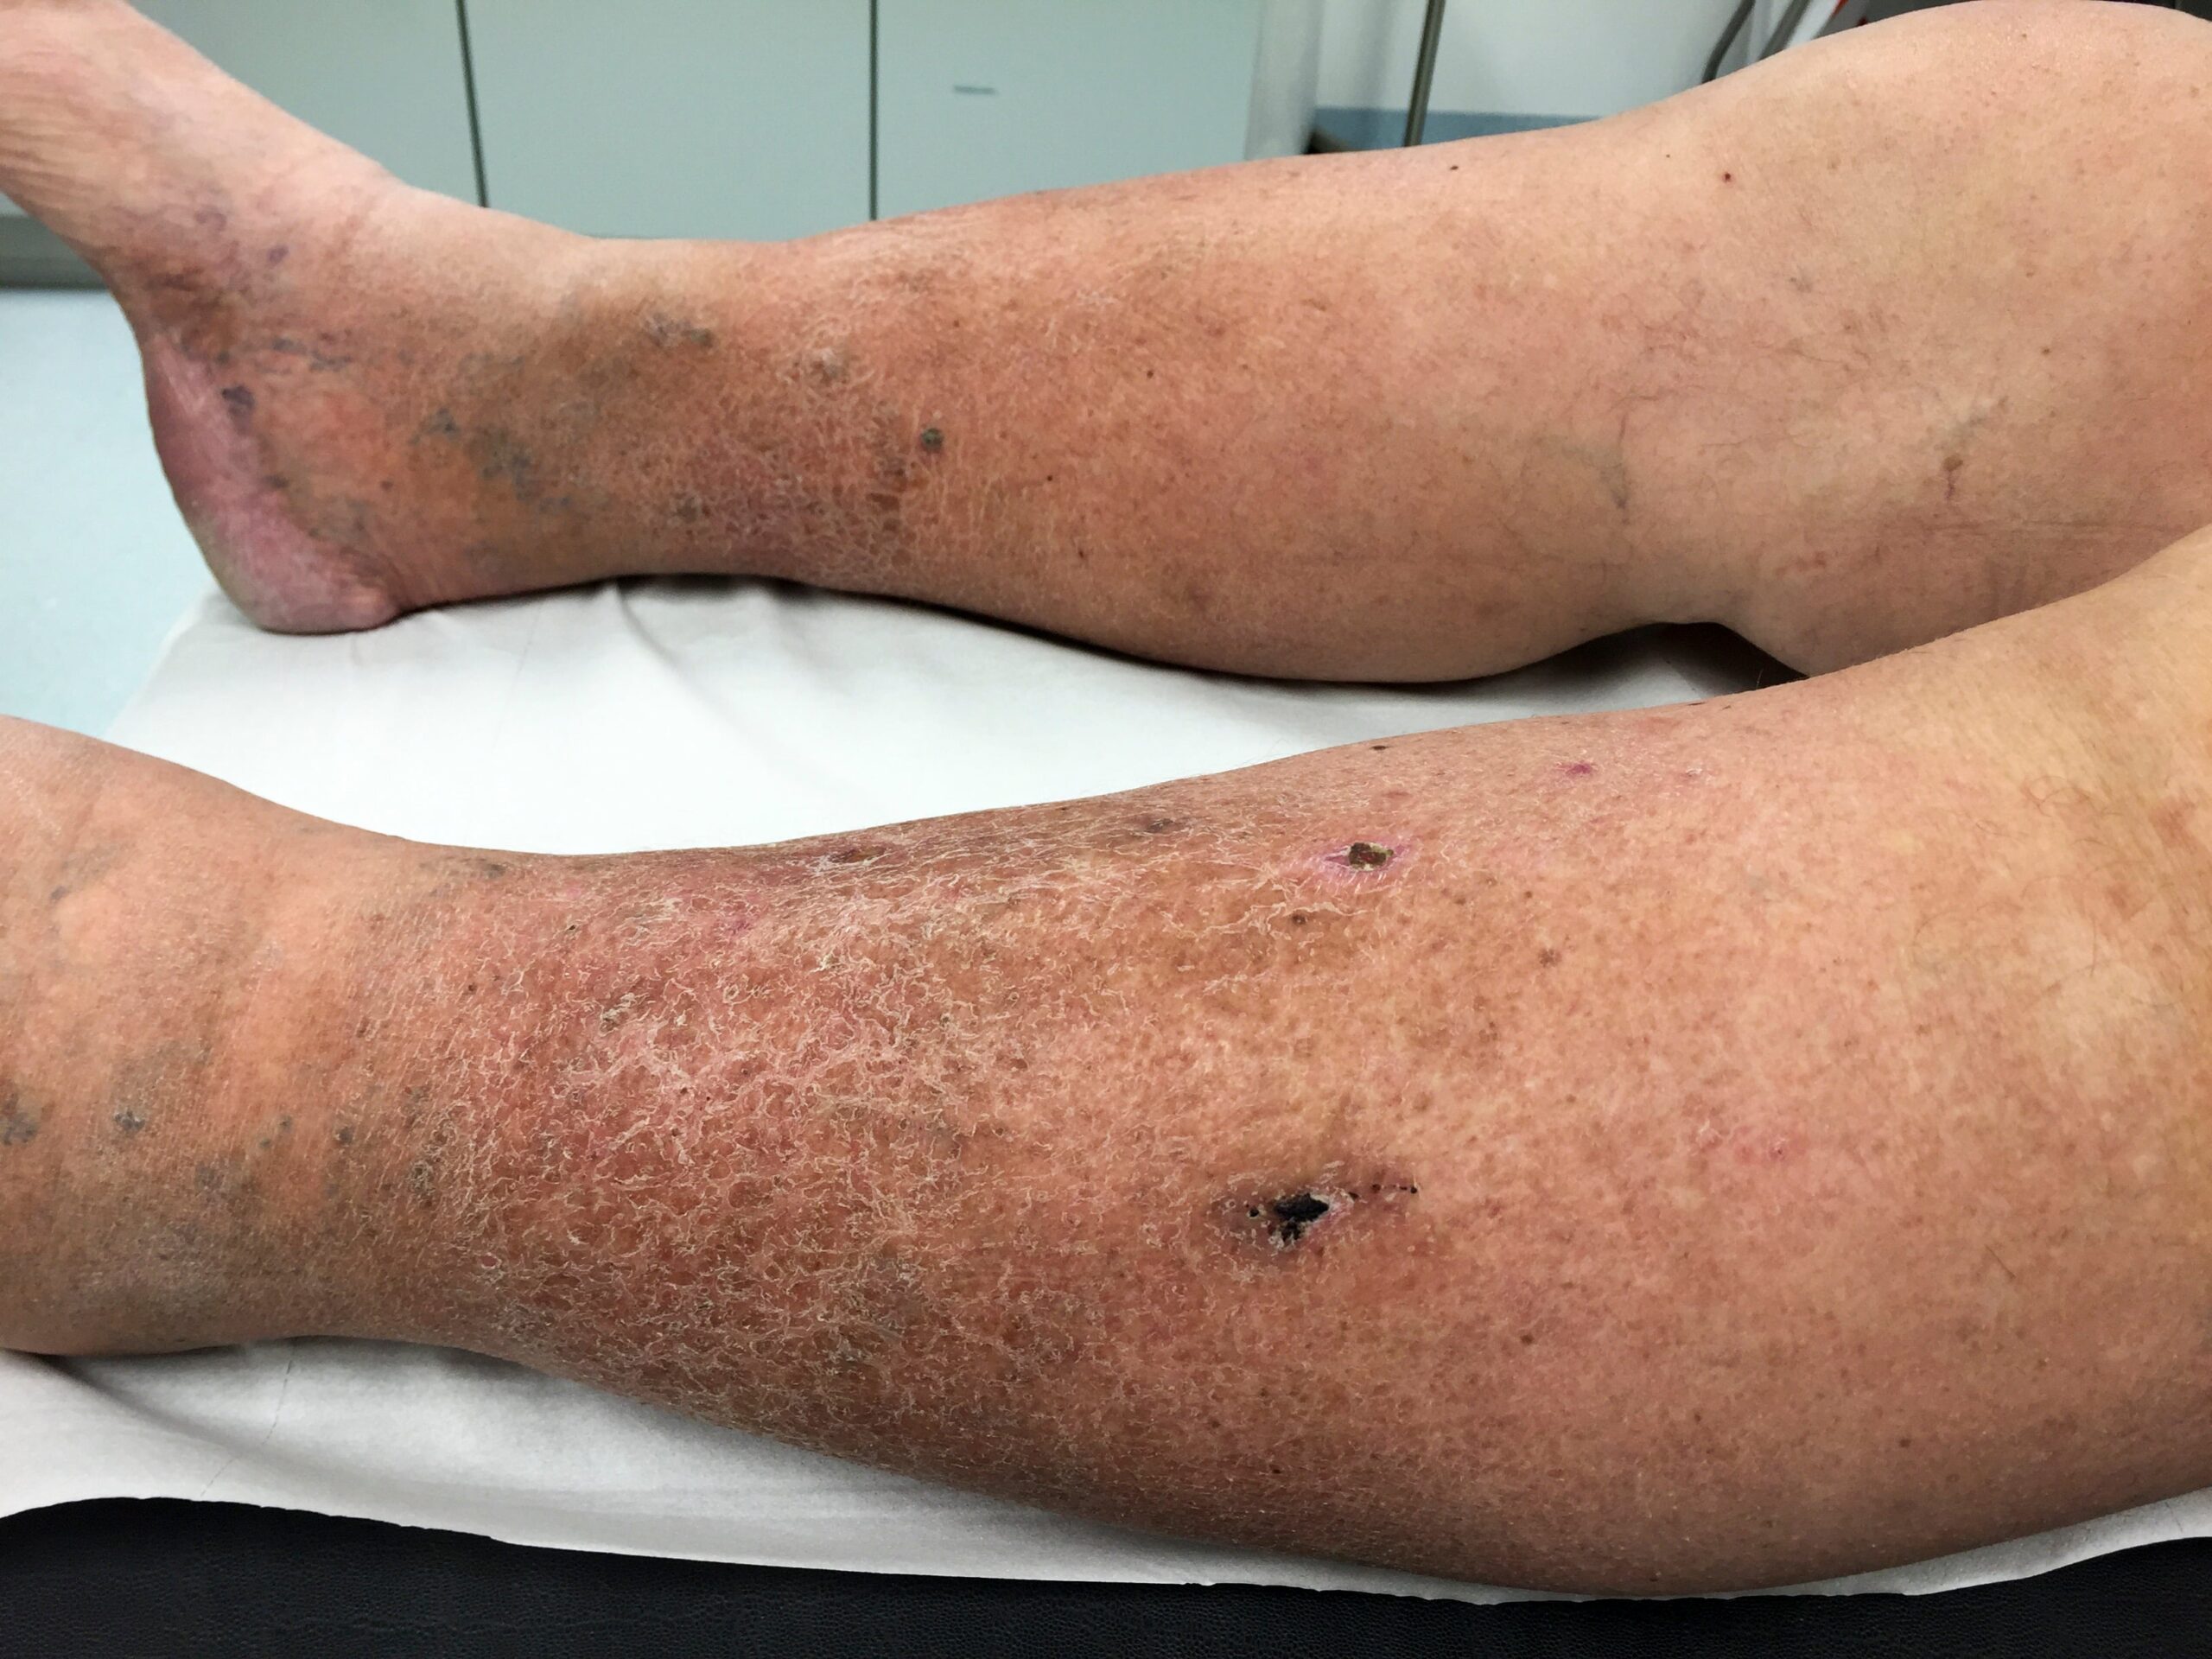 skin changes due to chronic venous insufficiency